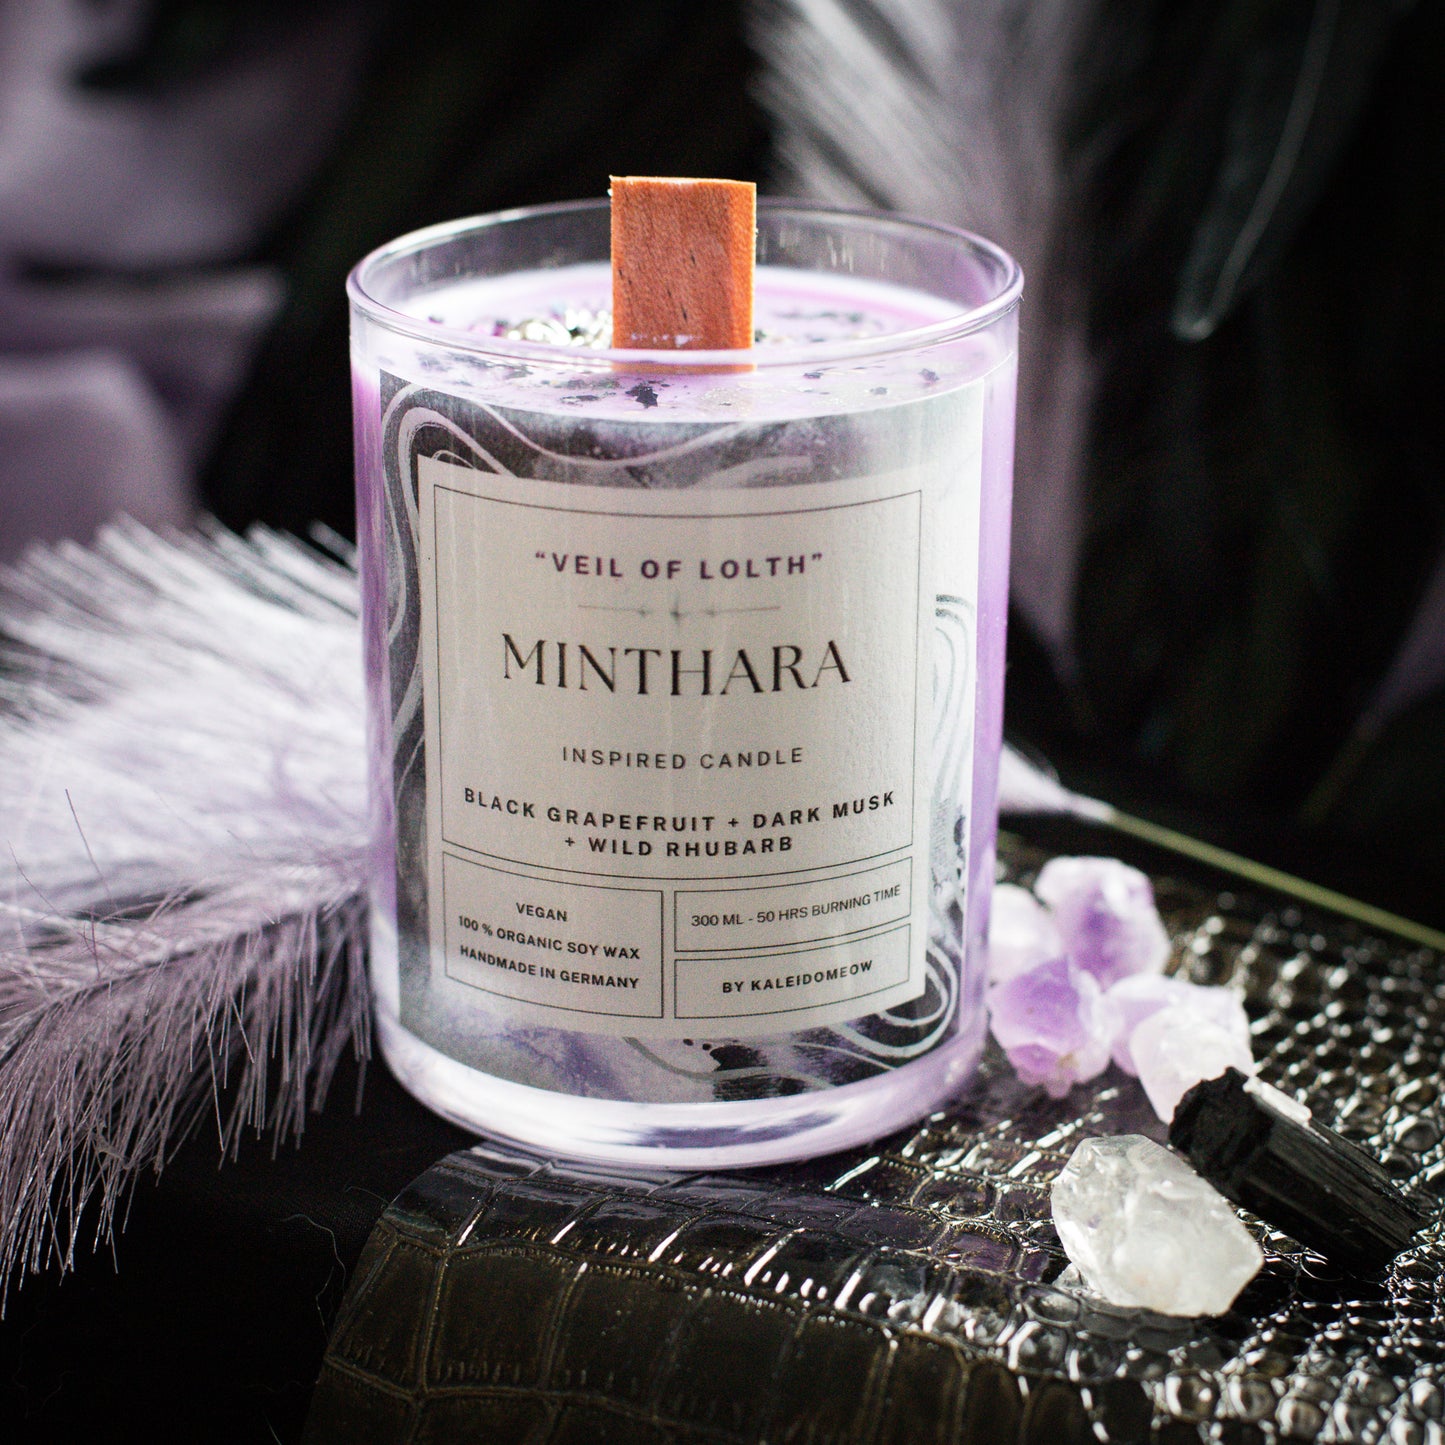 Minthara inspired candle - 'Veil of Lolth' Baldurs Gate 3 inspired soy Candles 300 ML